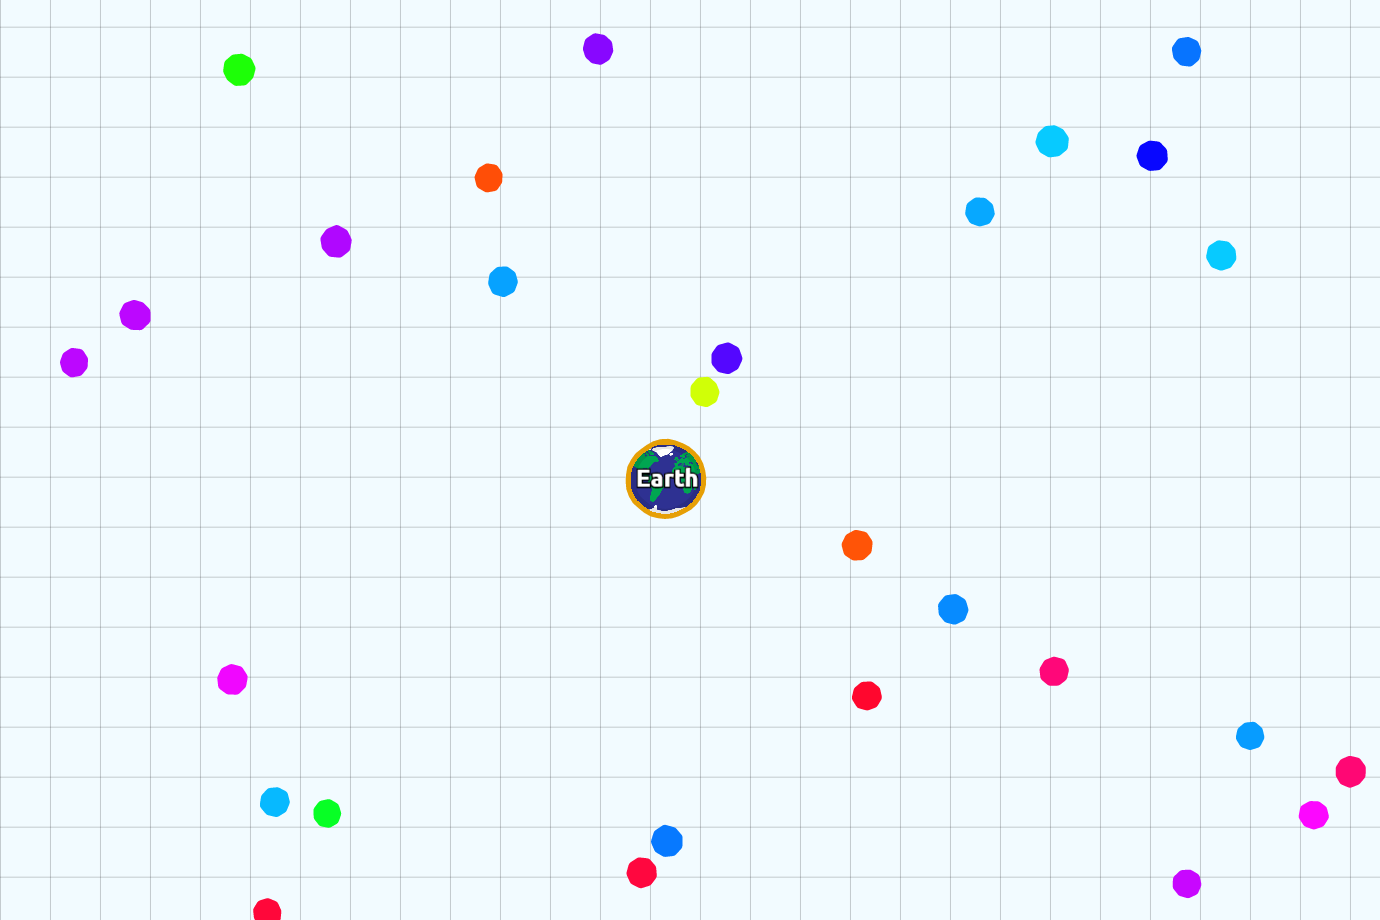 Eat and Be Eaten: How to Survive and Thrive in Agar.io